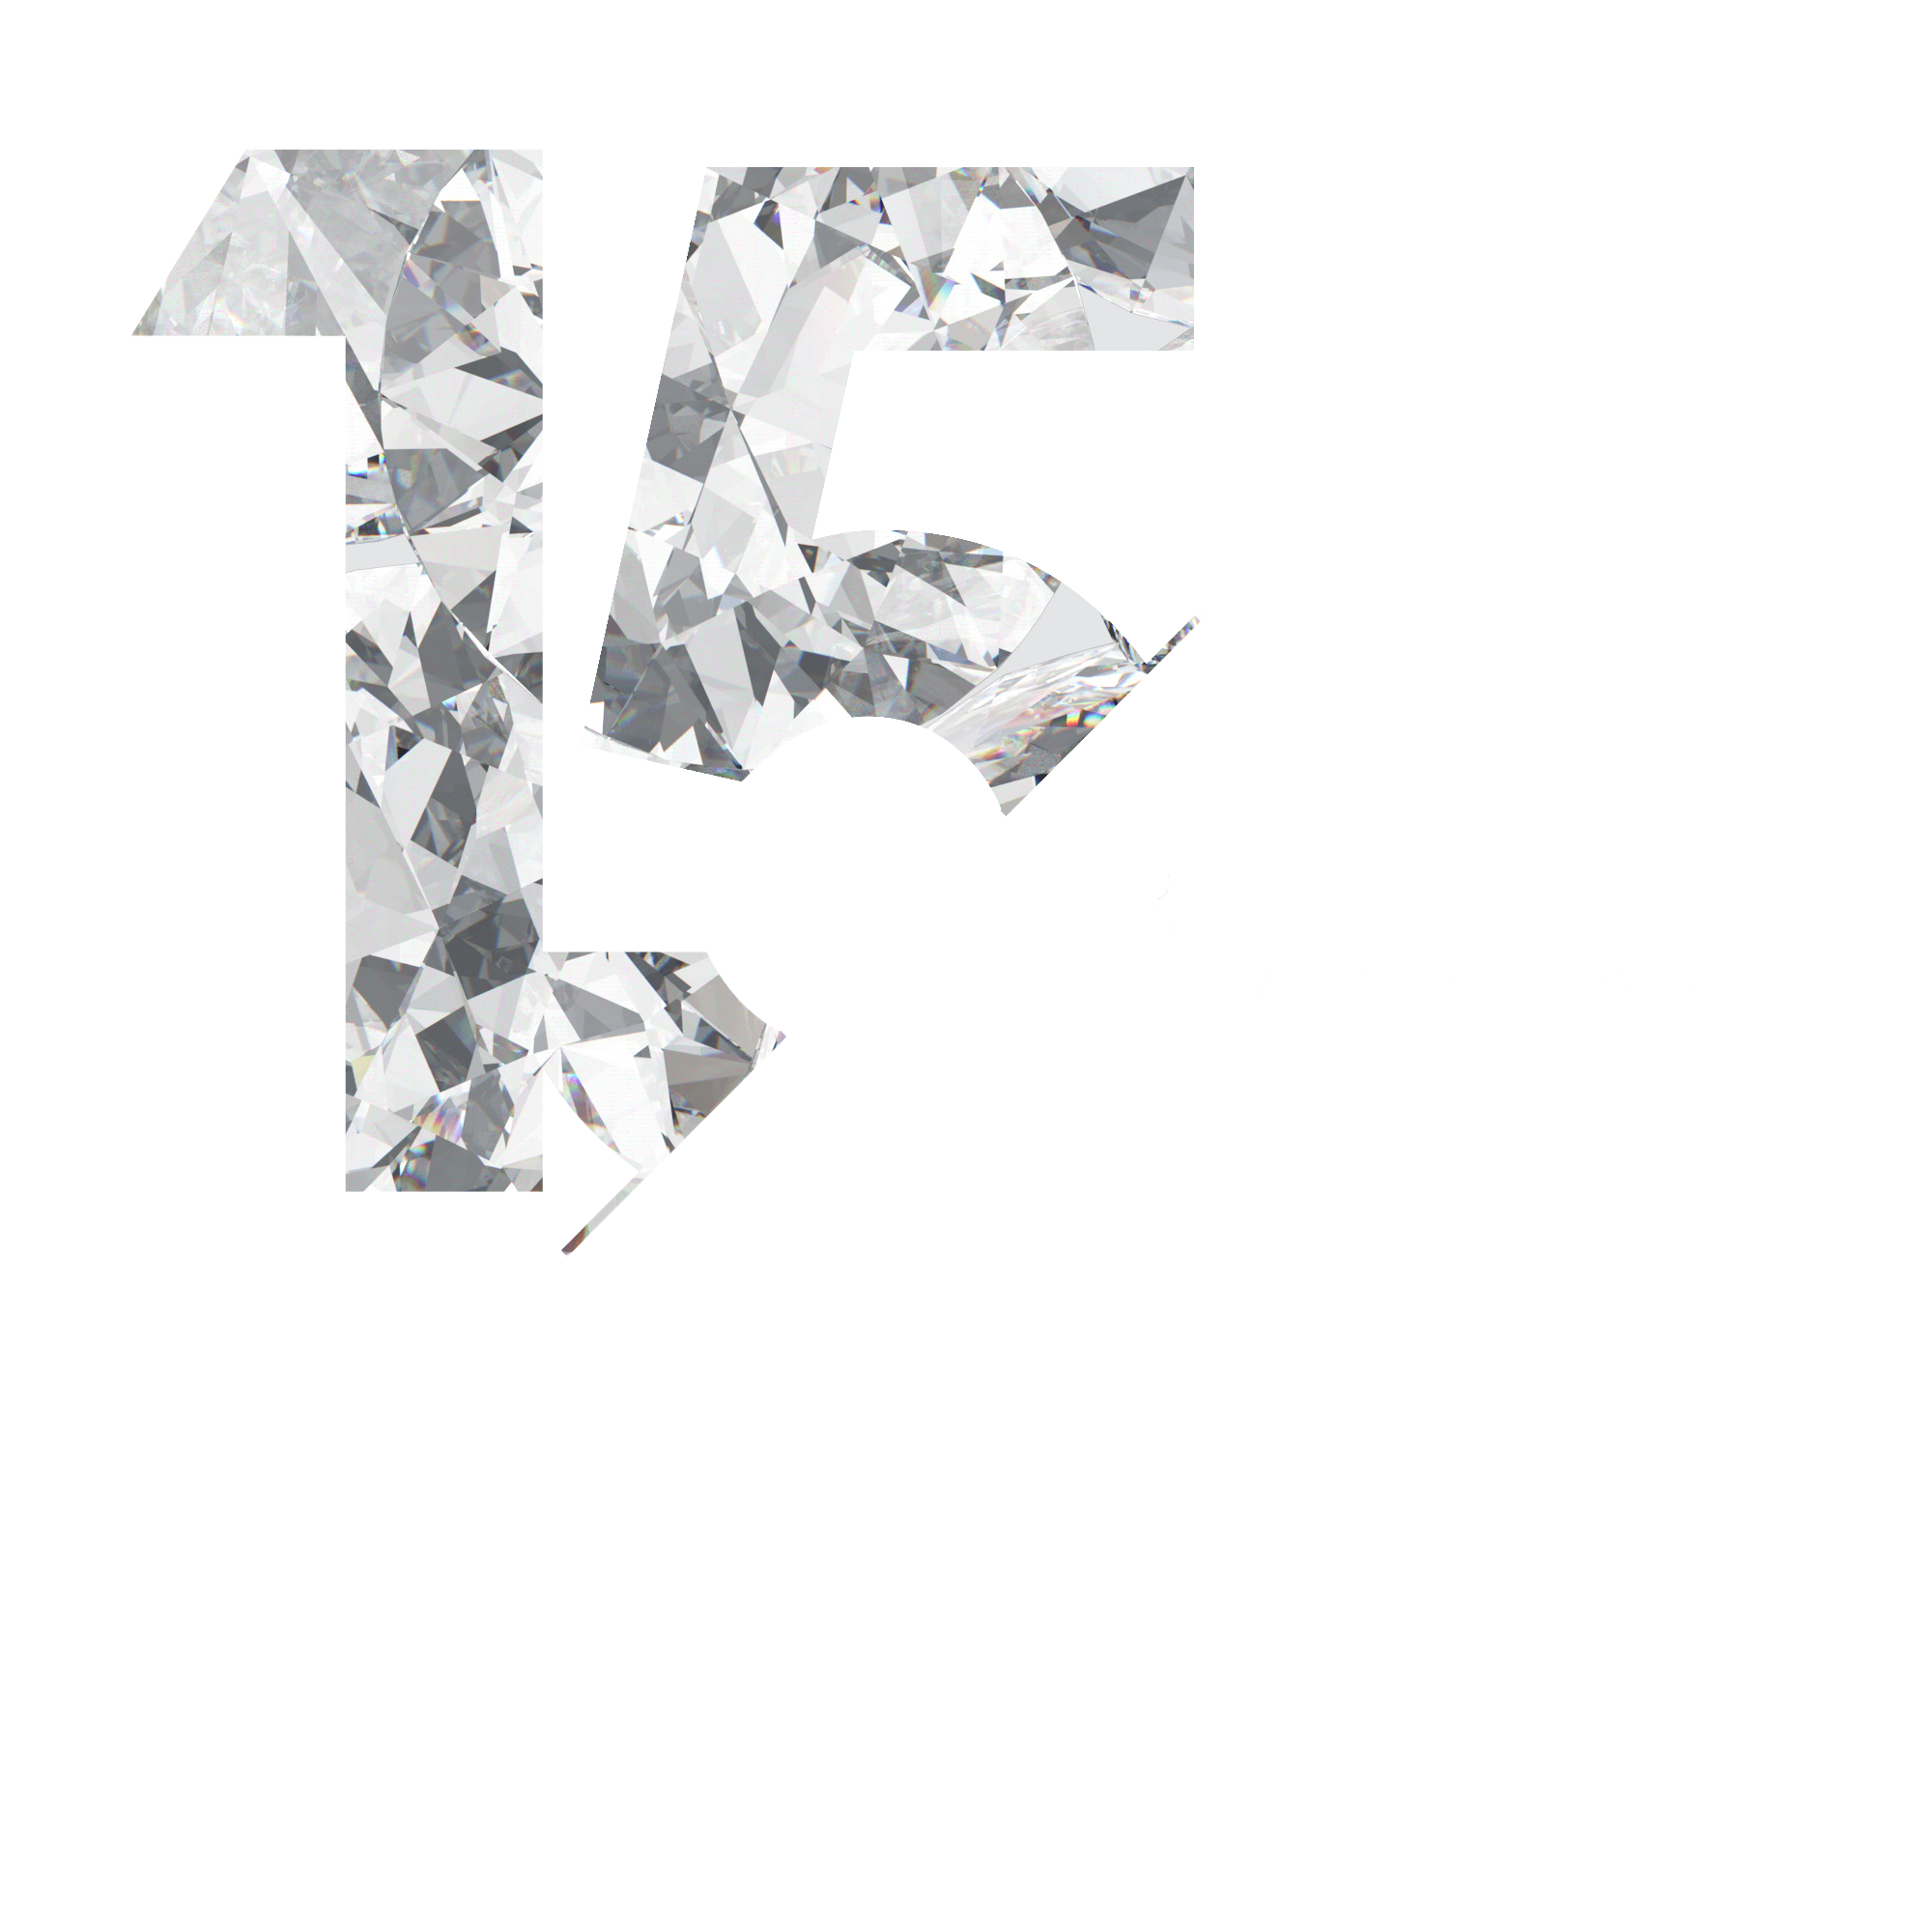 A Crystal 15 representing the 15th anniversary of the event.